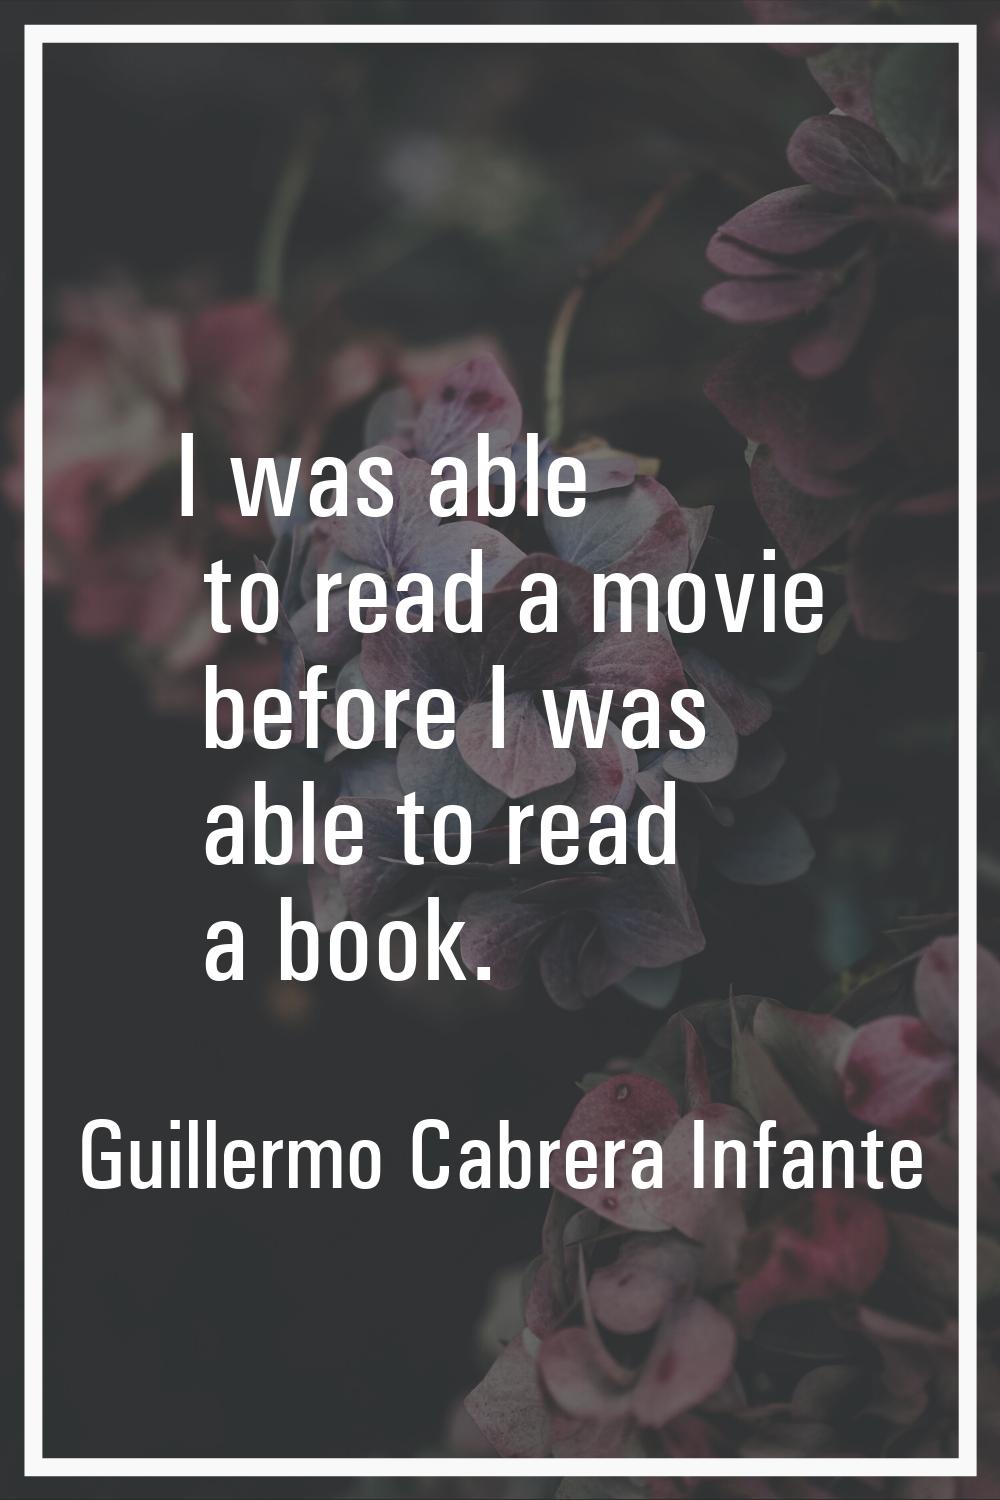 I was able to read a movie before I was able to read a book.